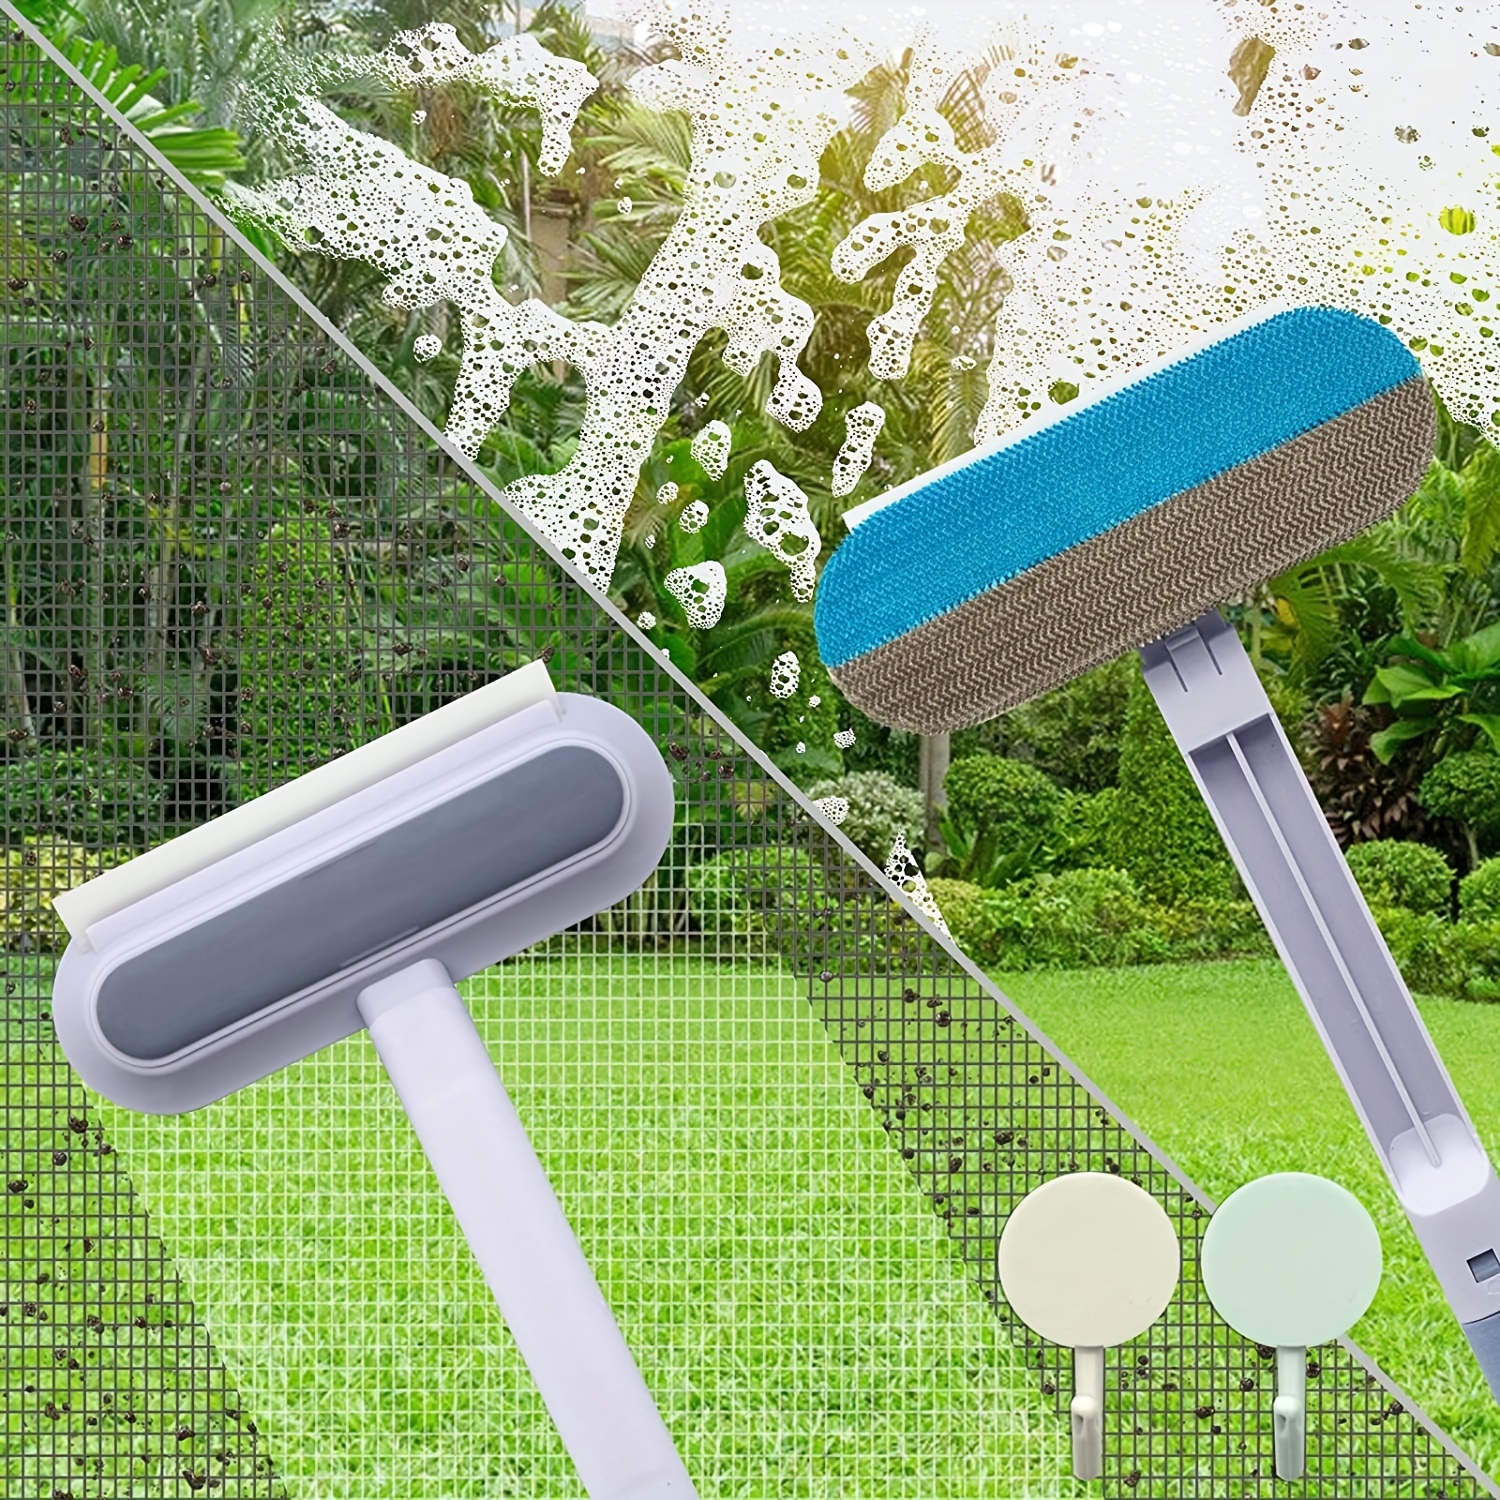 4 in 1 Window Screen Cleaner,Magic Window Cleaning Brush,Window Cleaner  Tool,Pet Hair Remover,Grout Brush Scrubber,Window Mesh Screen Cleaner,Window  Cleaner Brush and Squeege,Window Cleaning Kit 